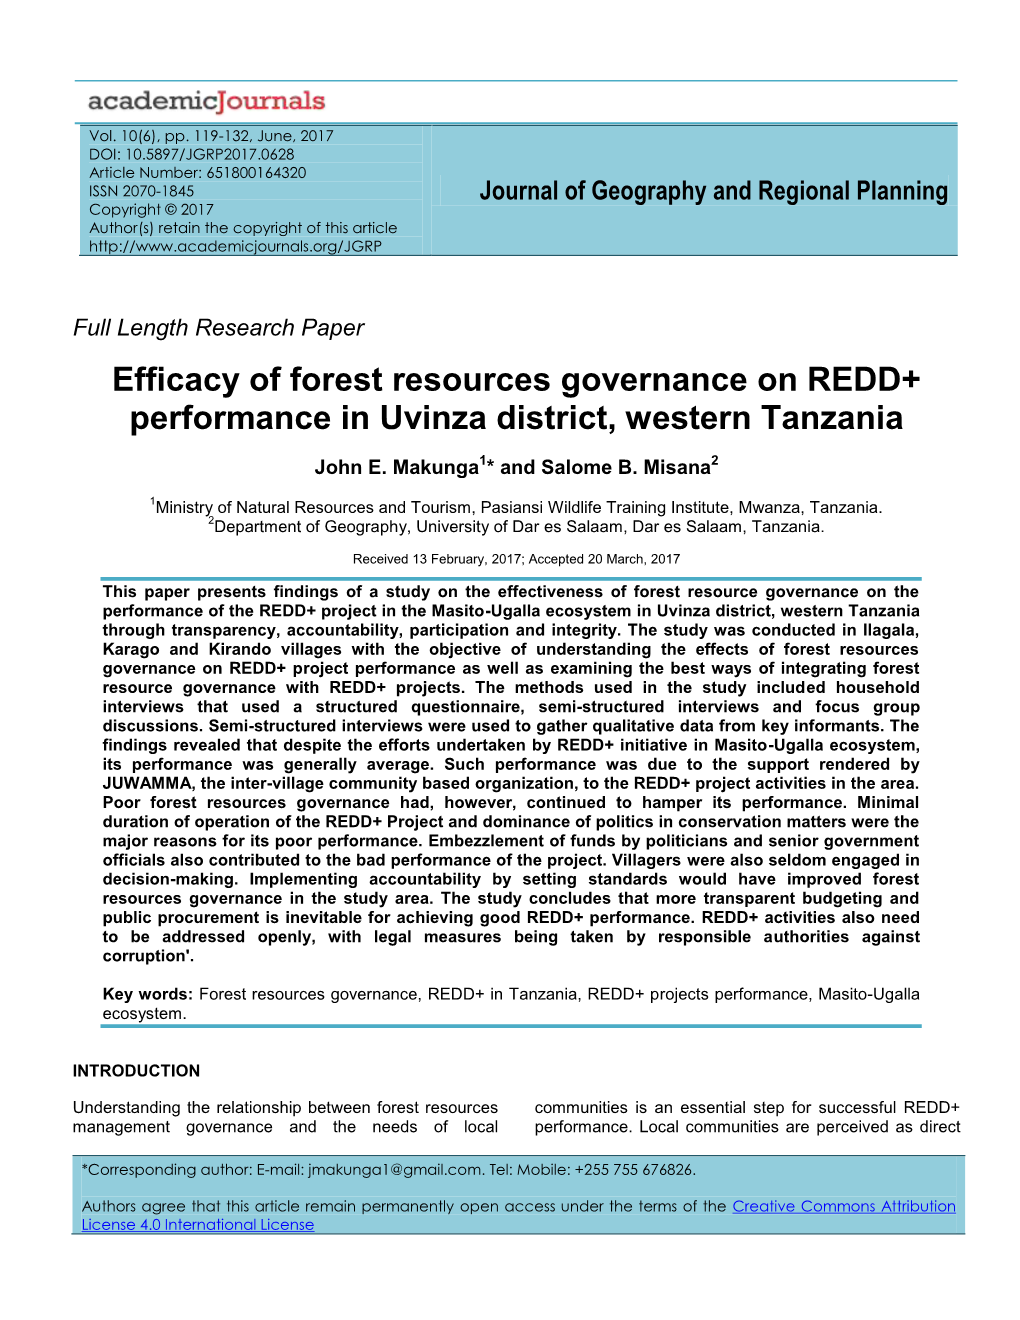 Efficacy of Forest Resources Governance on REDD+ Performance in Uvinza District, Western Tanzania